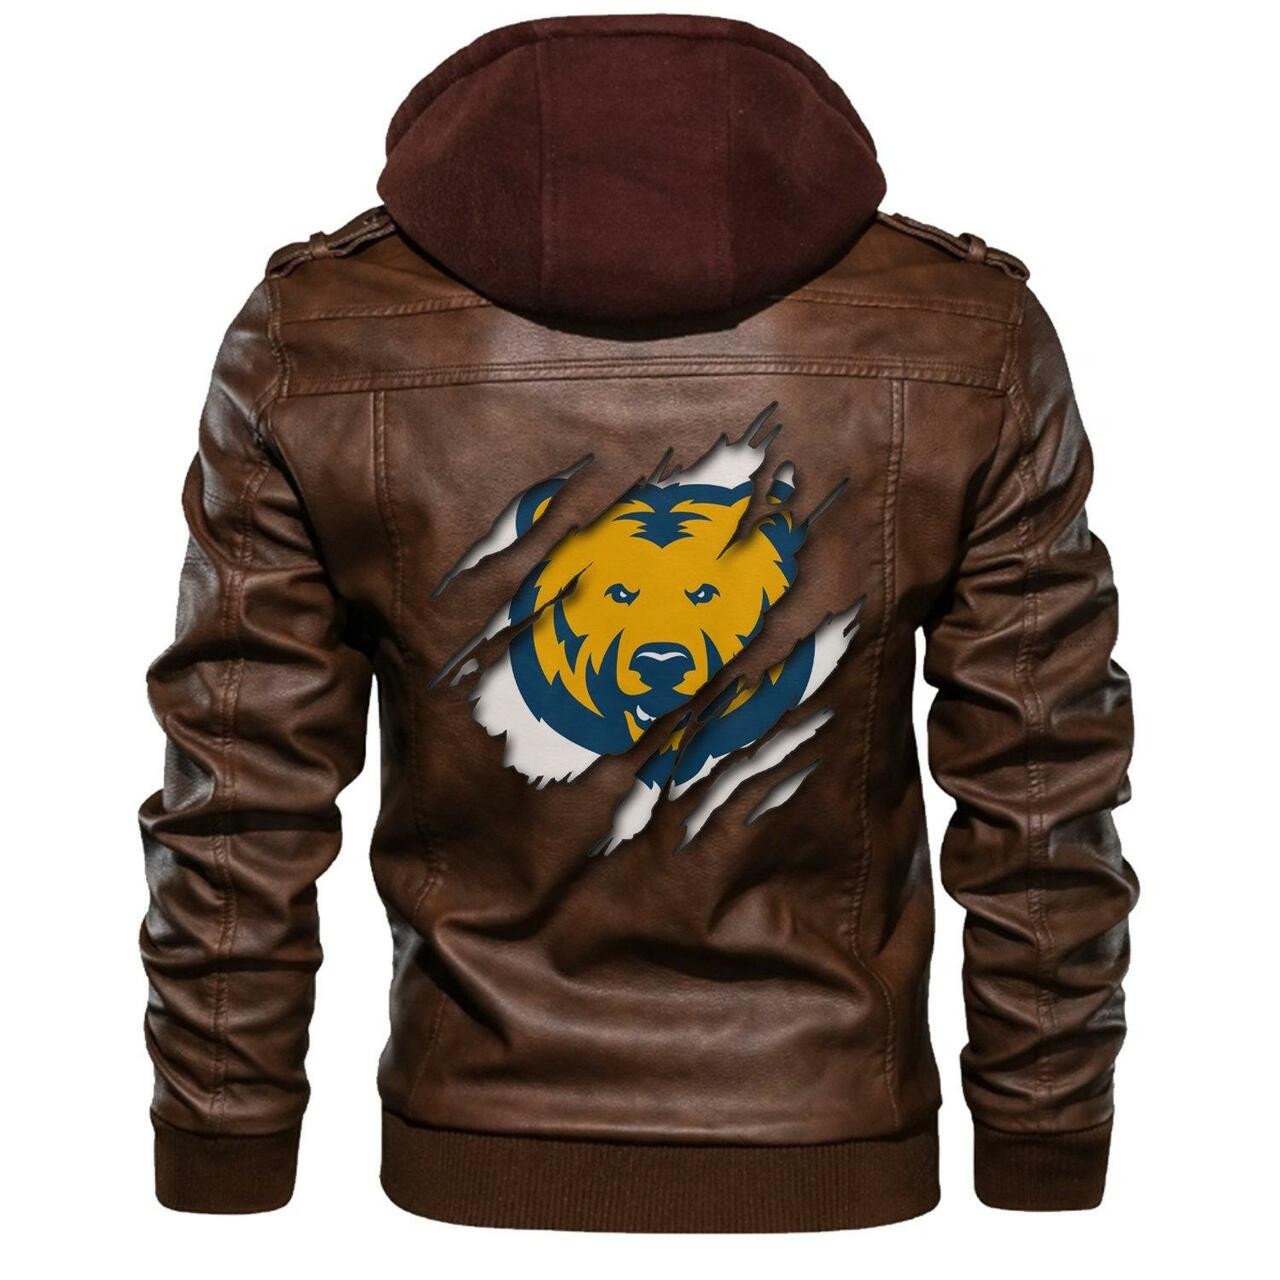 Check out and find the right leather jacket below 39